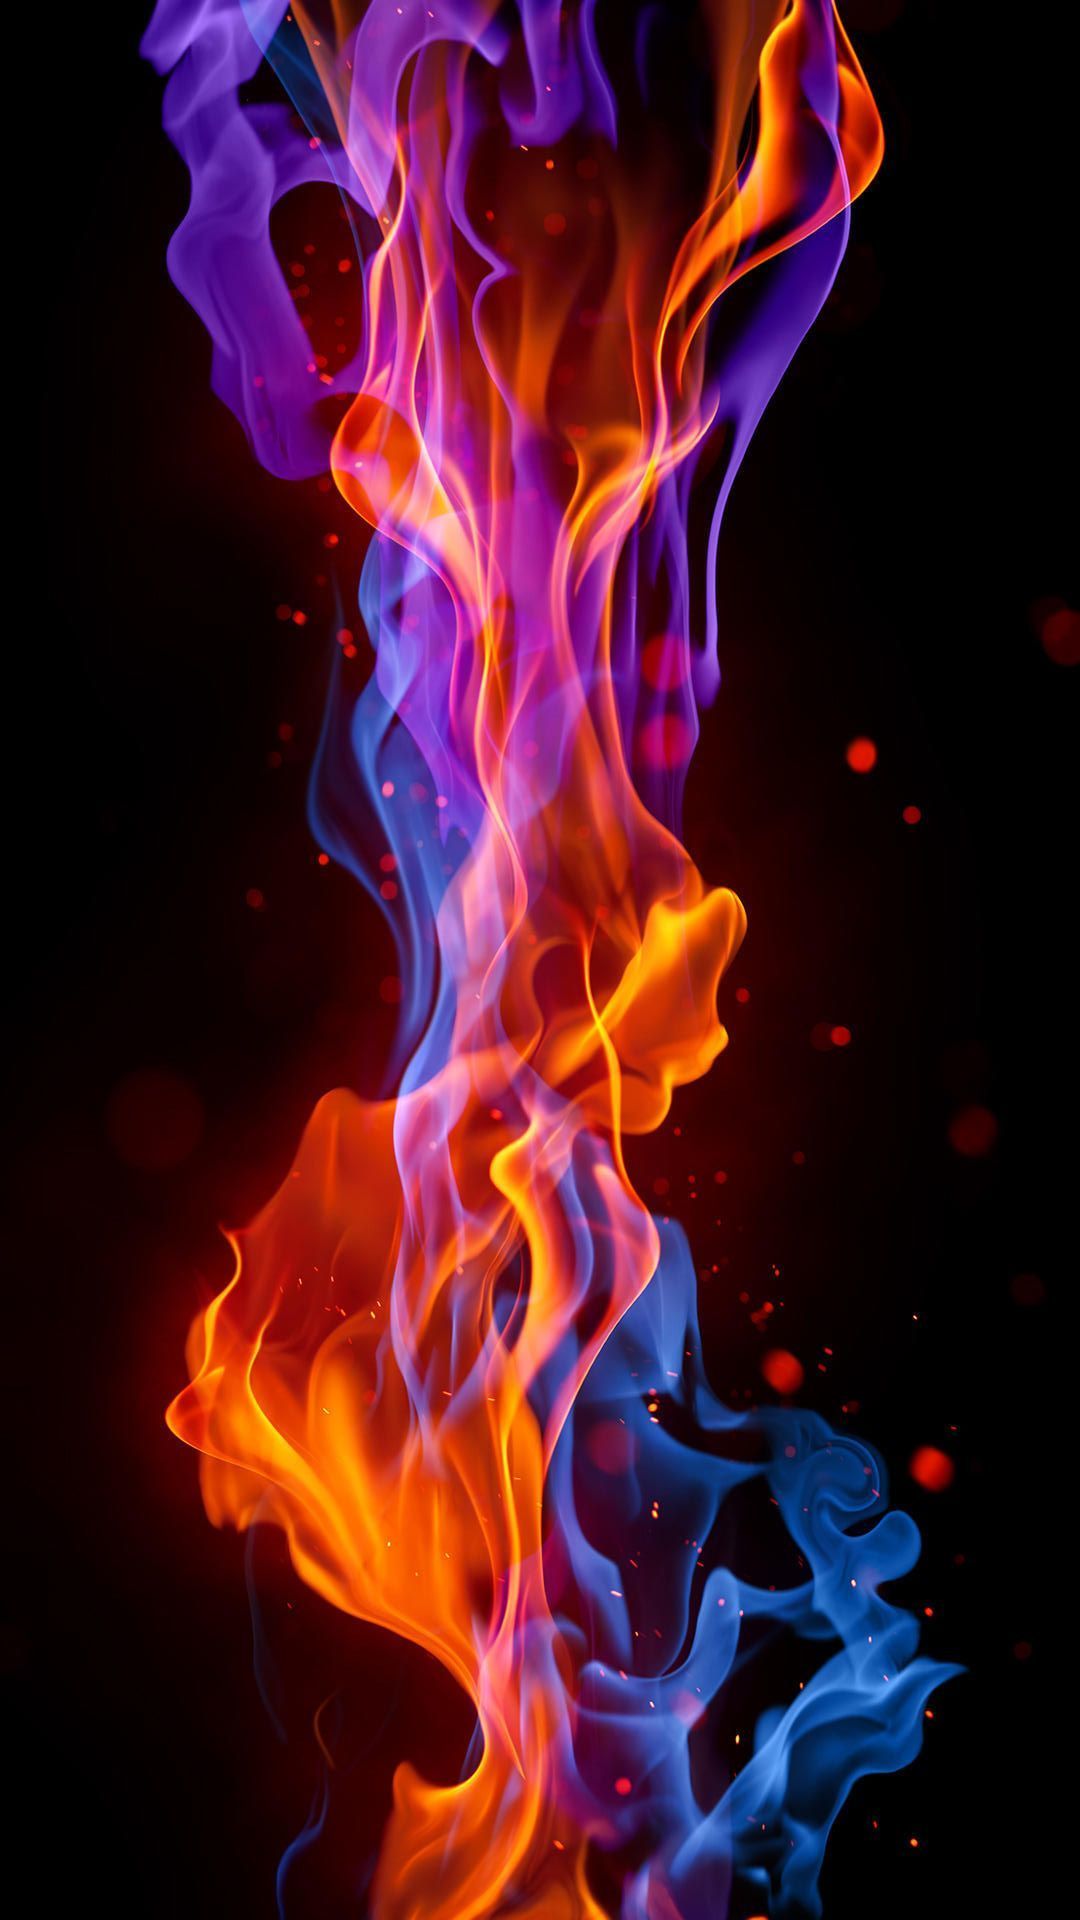 A colorful flame is shown on black background - Fire, flames